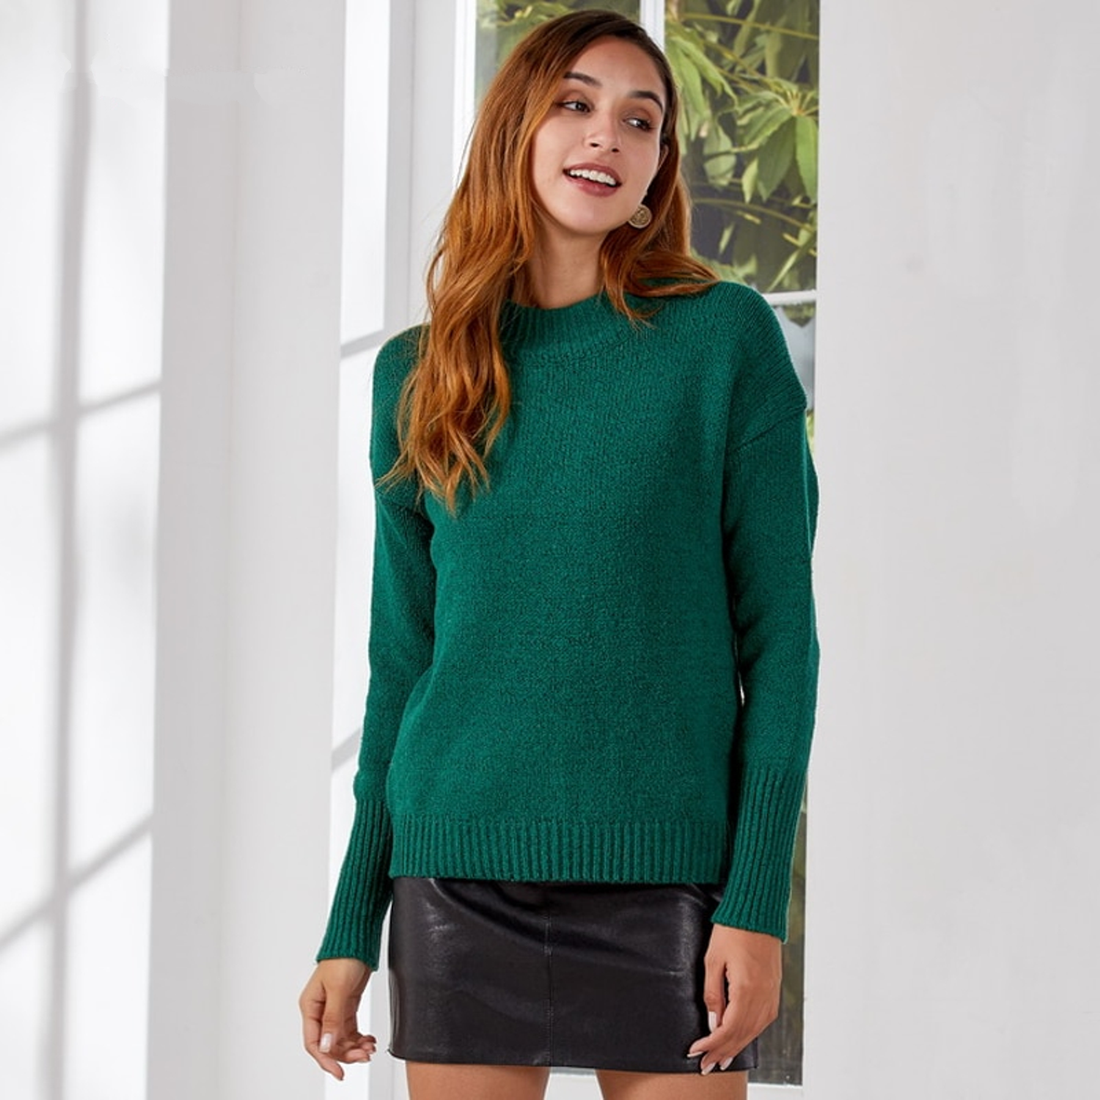 Women's Autumn/Winter Warm Thick Knitted Sweater